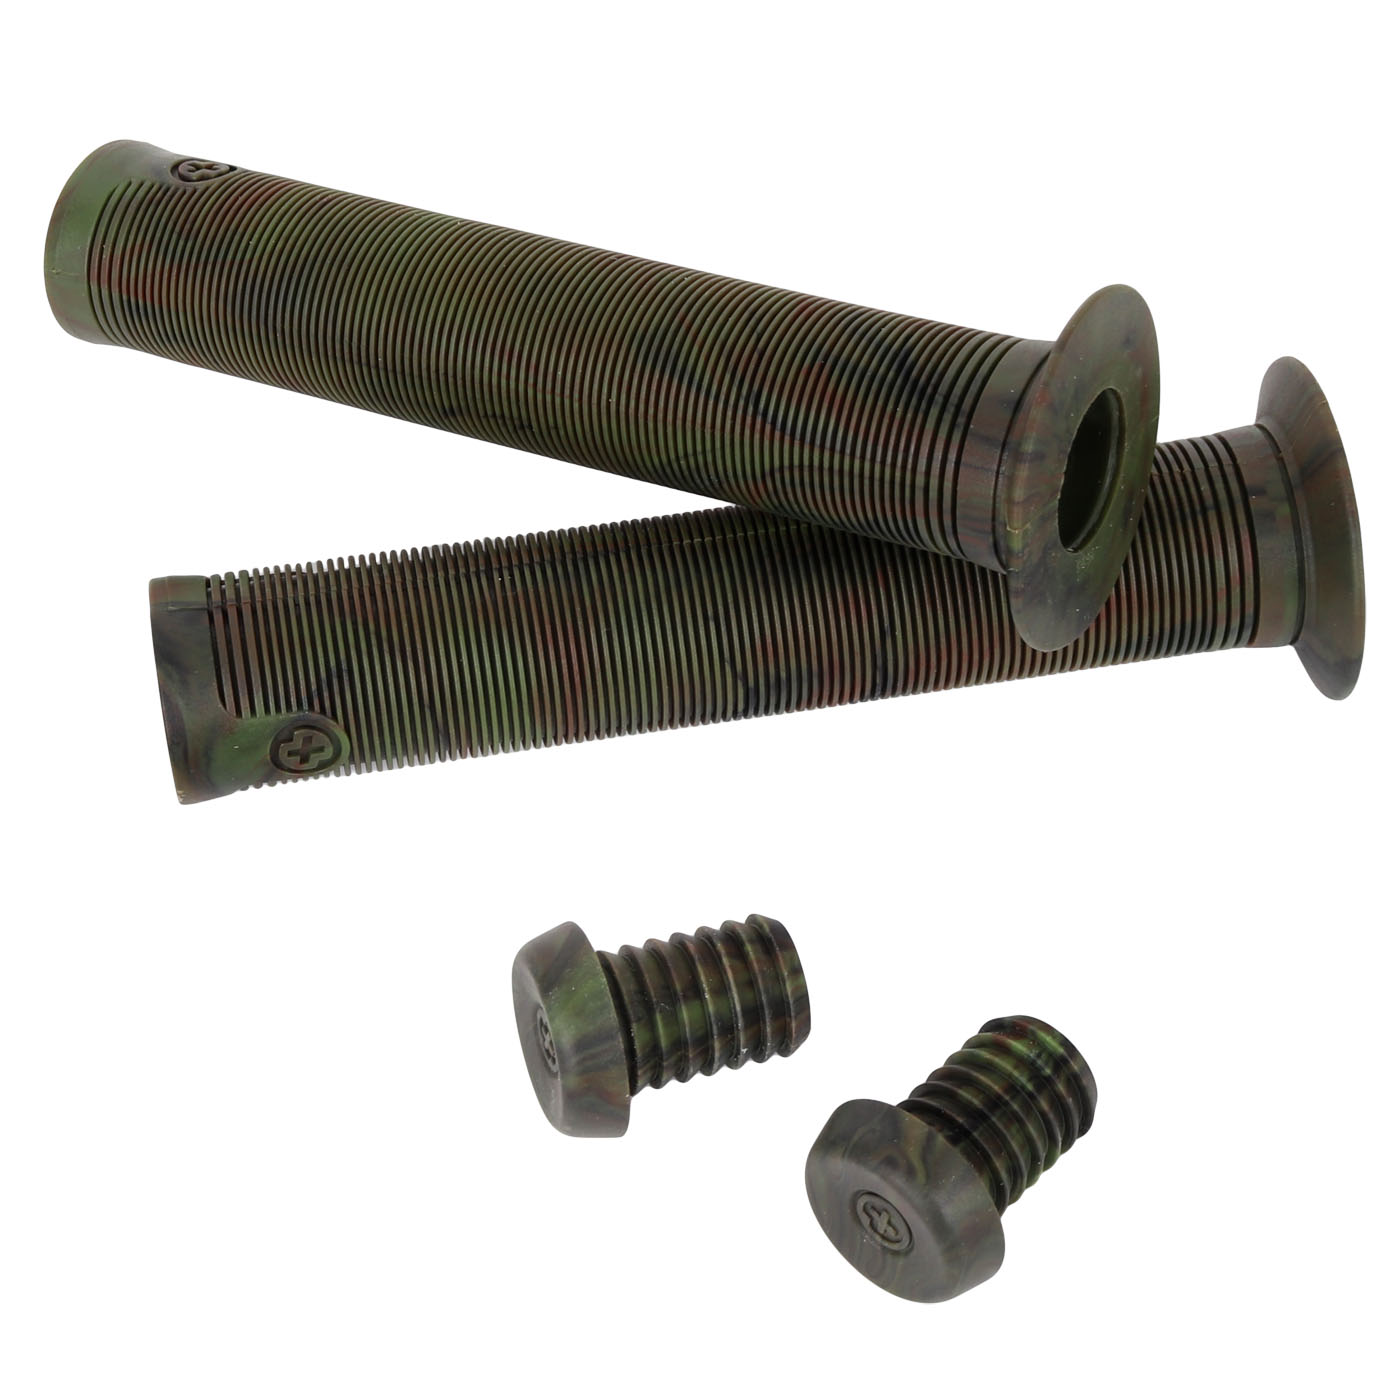 Picture of Salt Plus XL Grips - camouflage